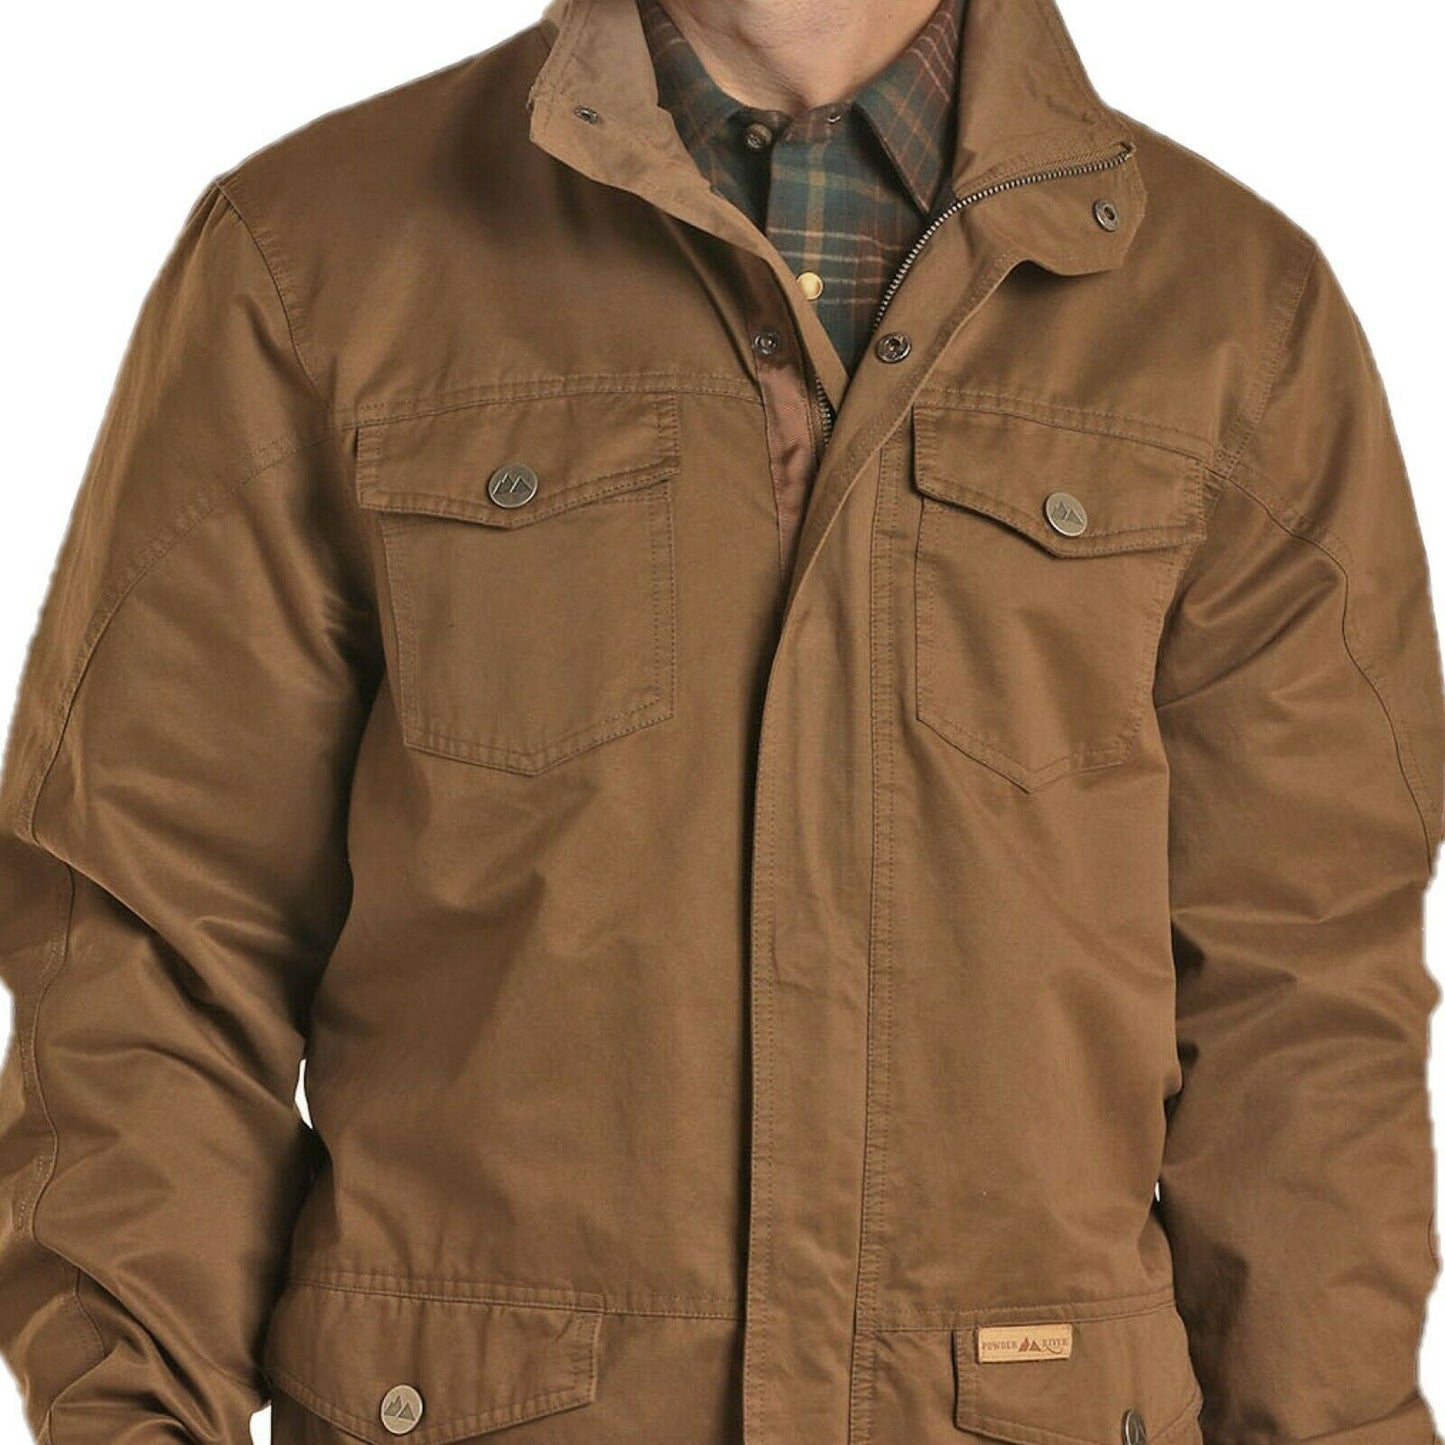 Powder River Outfitters Men's Rancher Brown Jacket 92-6755-25